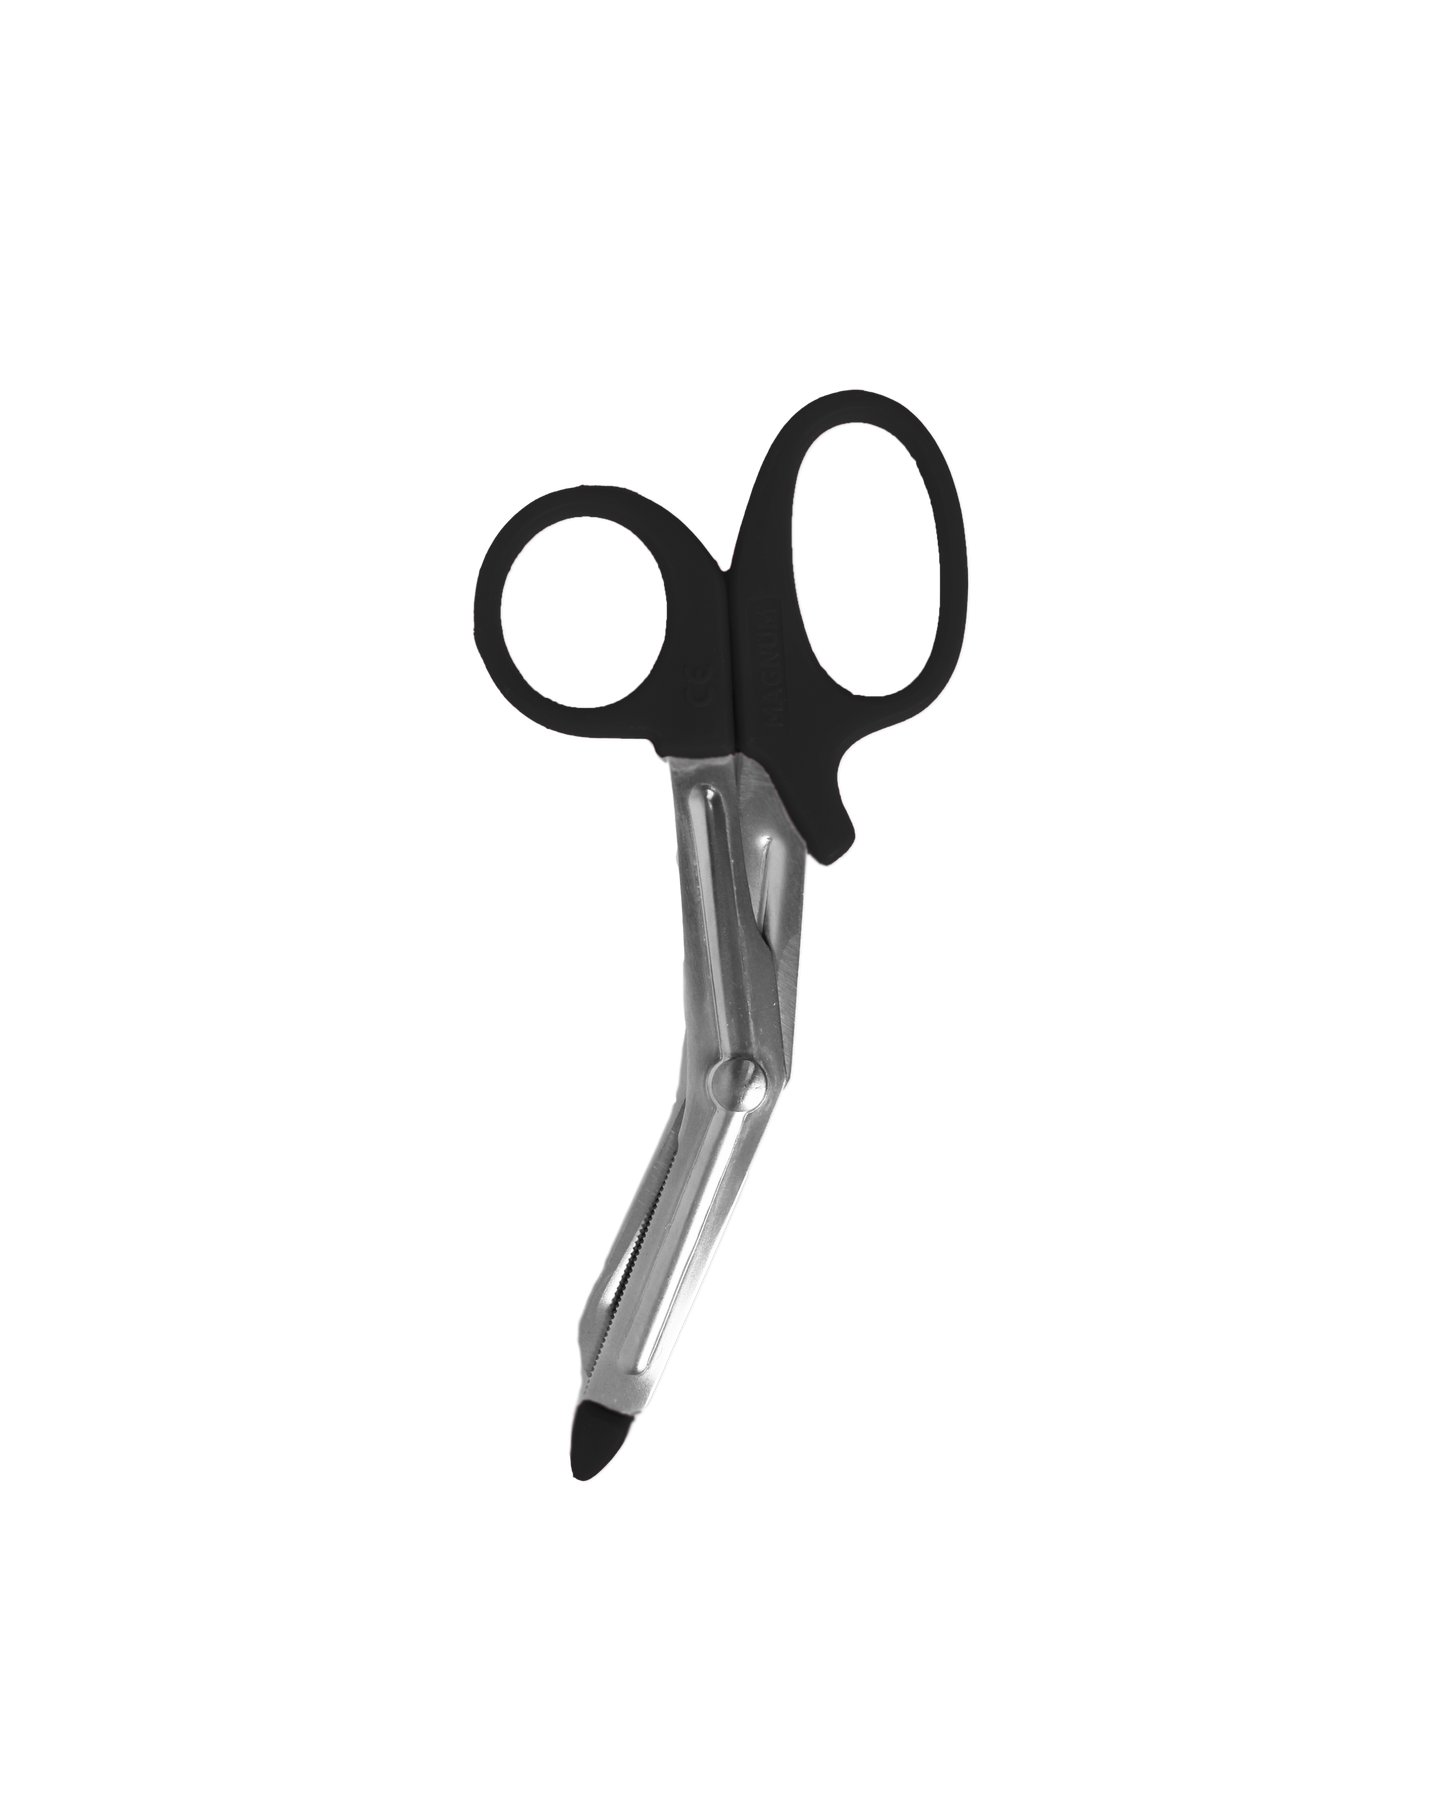 Surgical Utility Scissors - SPOS-192 - Surgipro